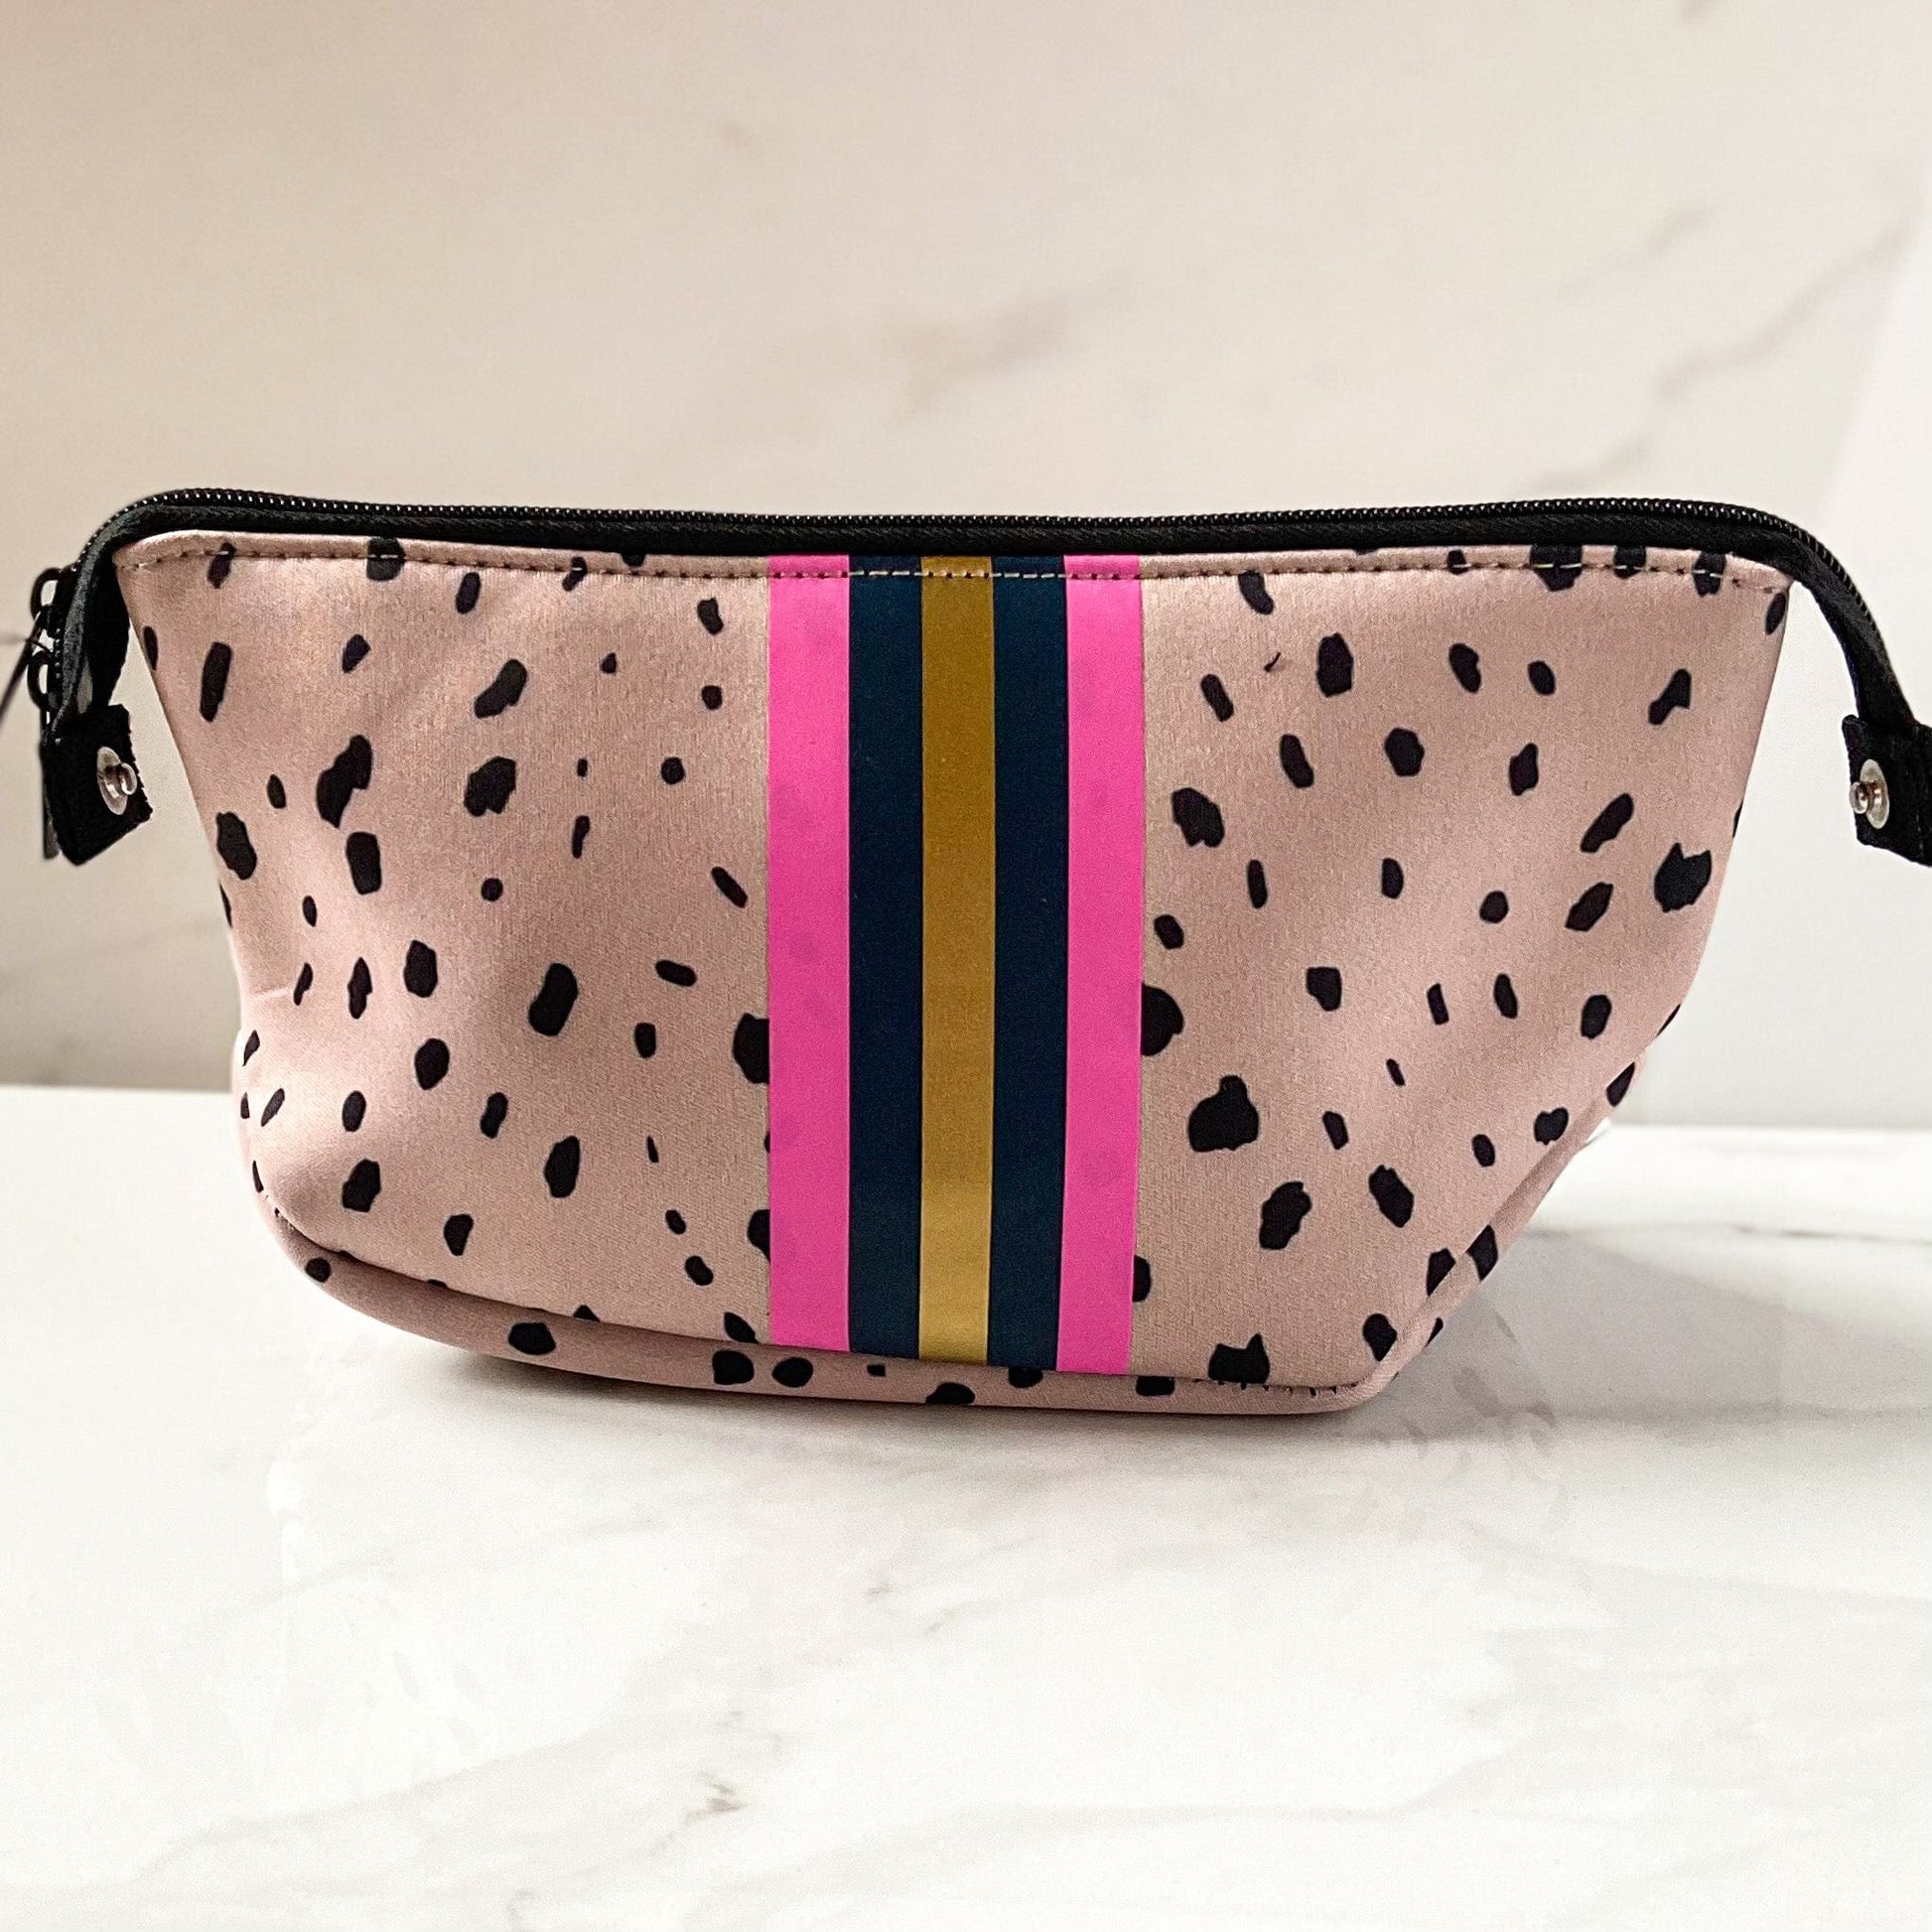 Neoprene makeup bag tan with black spots and pink and blue stripe